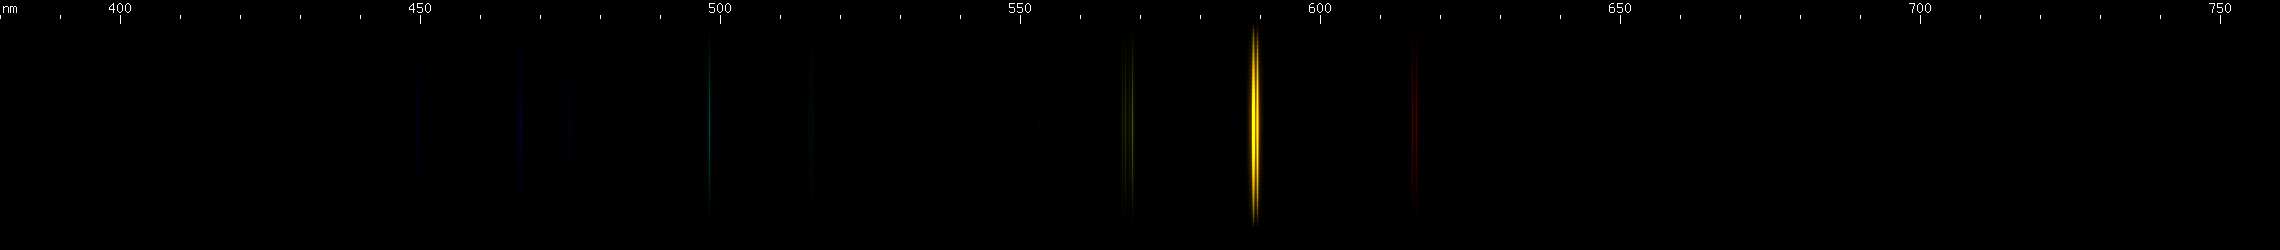 Spectral lines of Sodium.